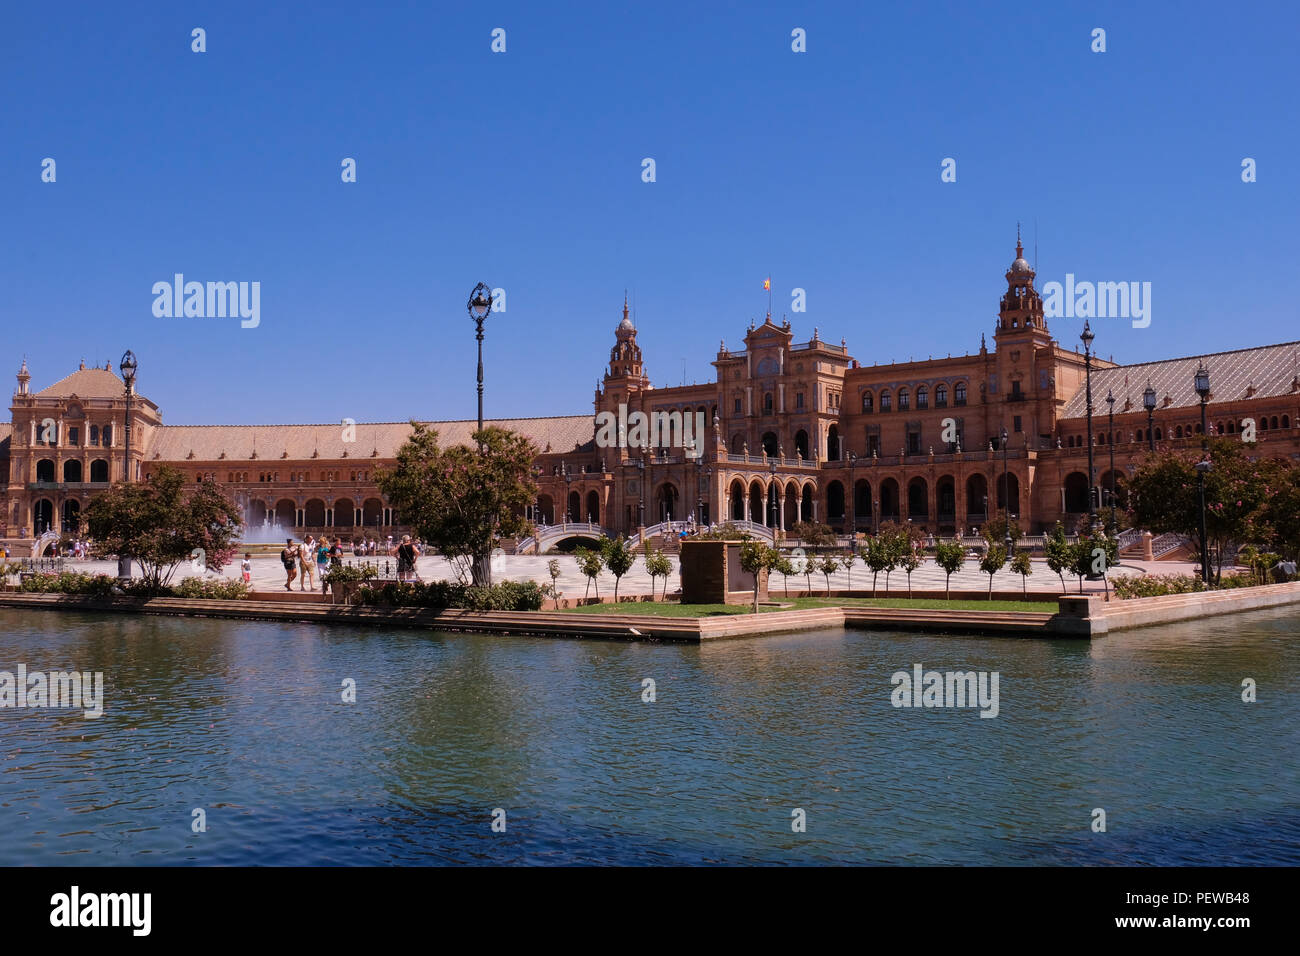 Landscape view of the plaza de Espana on the Parque de María Luisa in Sevilla, Spain, with water from the fountains in the foreground Stock Photo